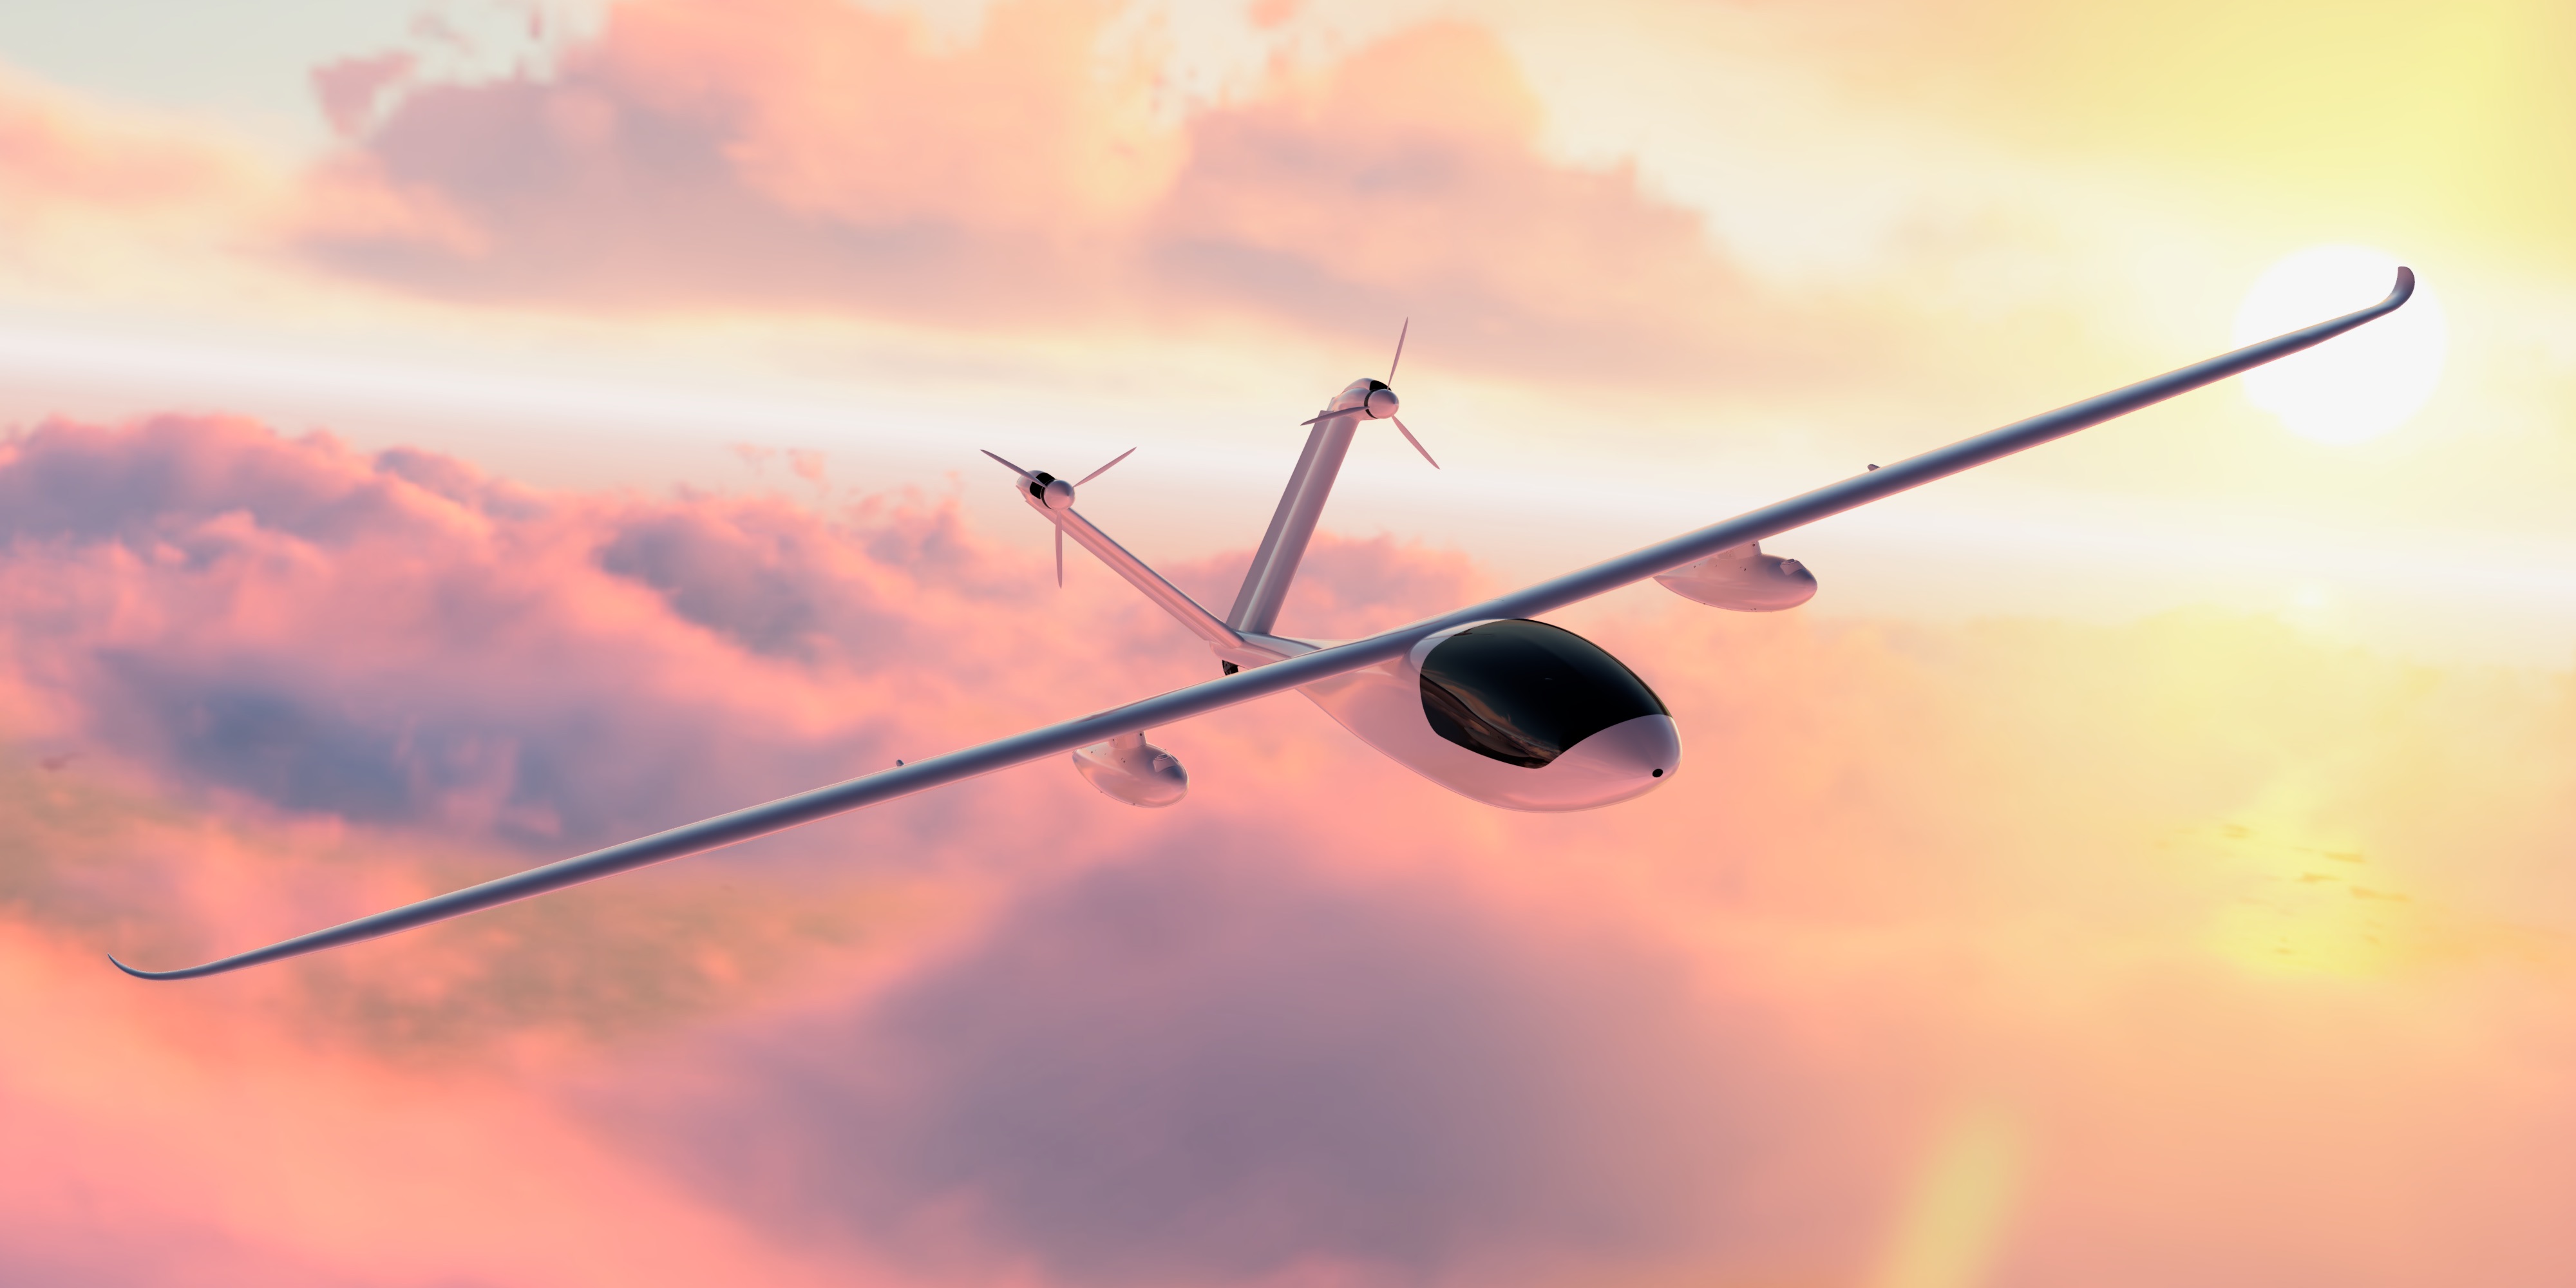 Certification Process for a Hybrid Electric Aircraft